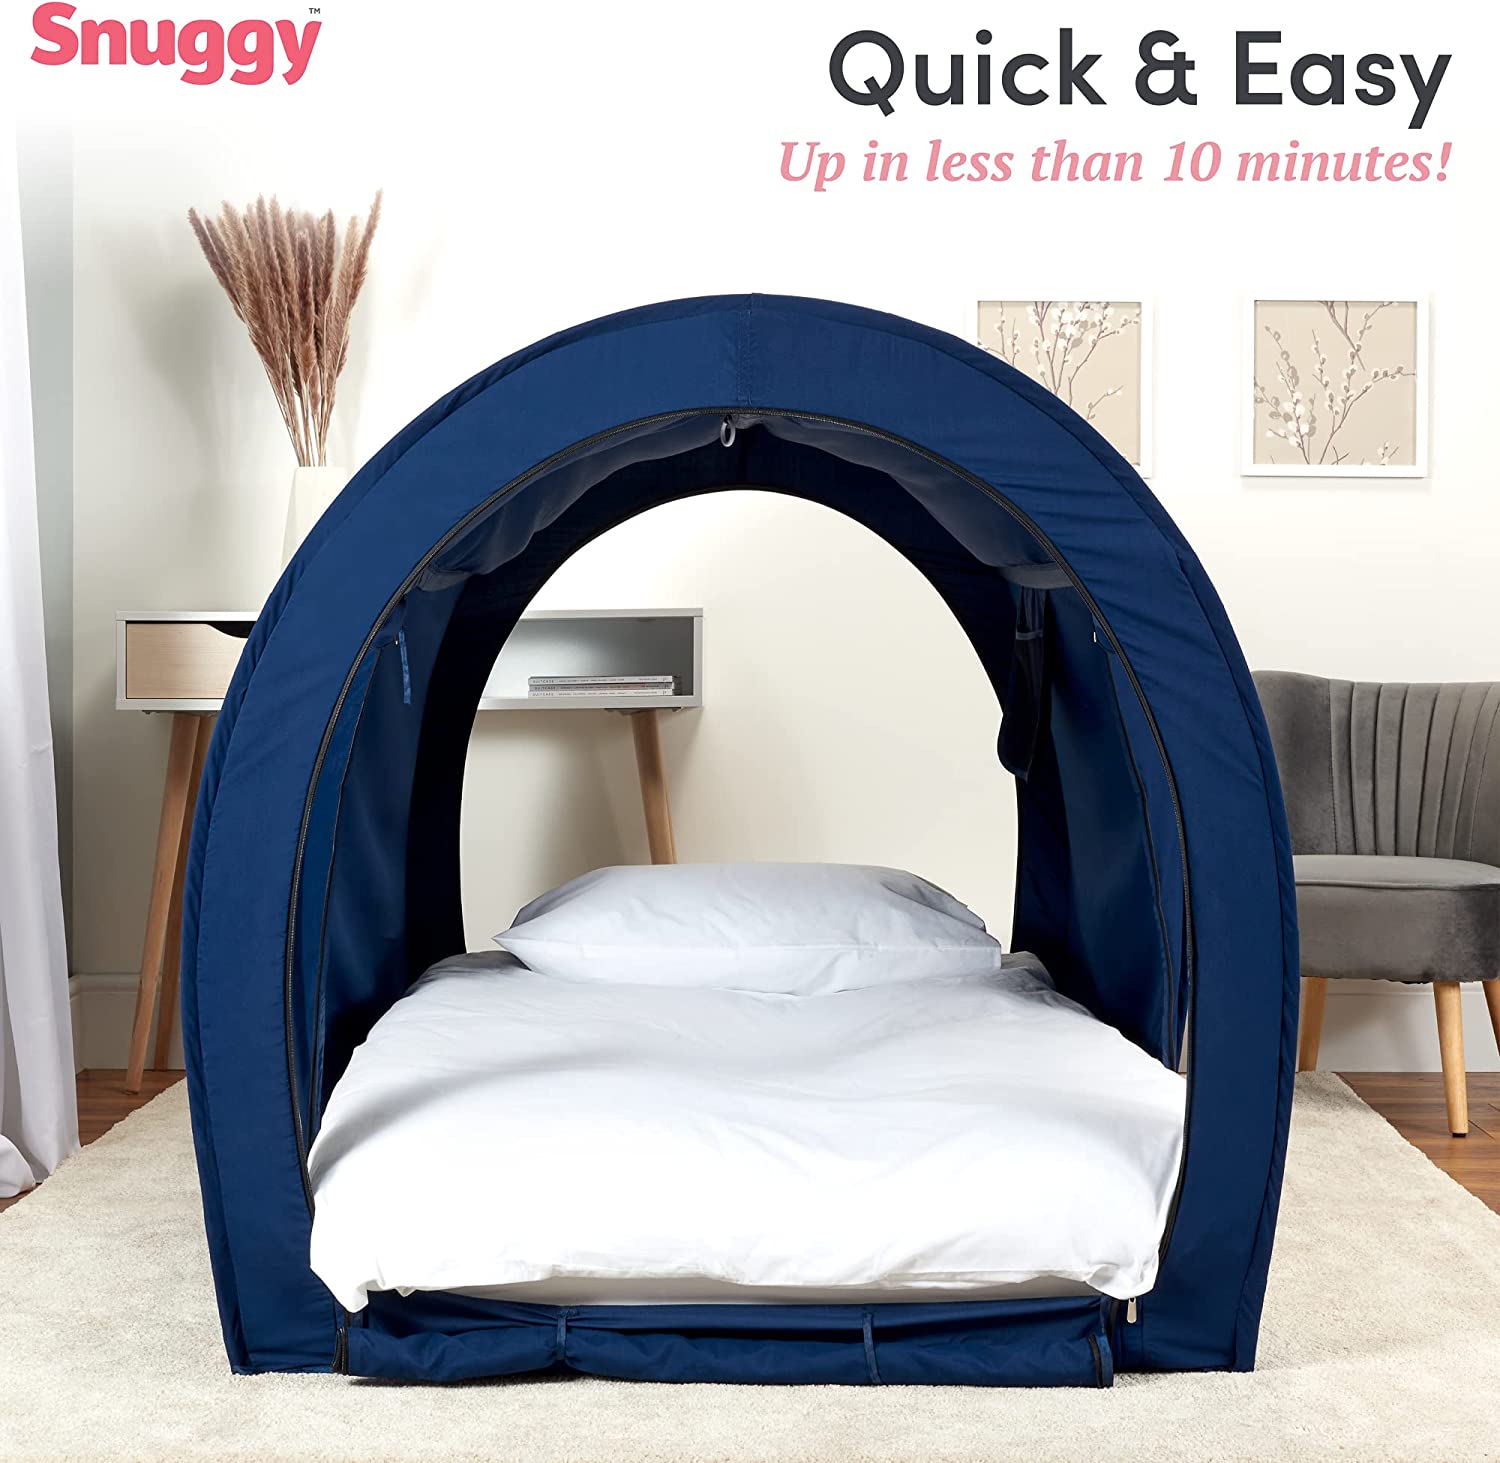 What is a bed tent? - Snuggy